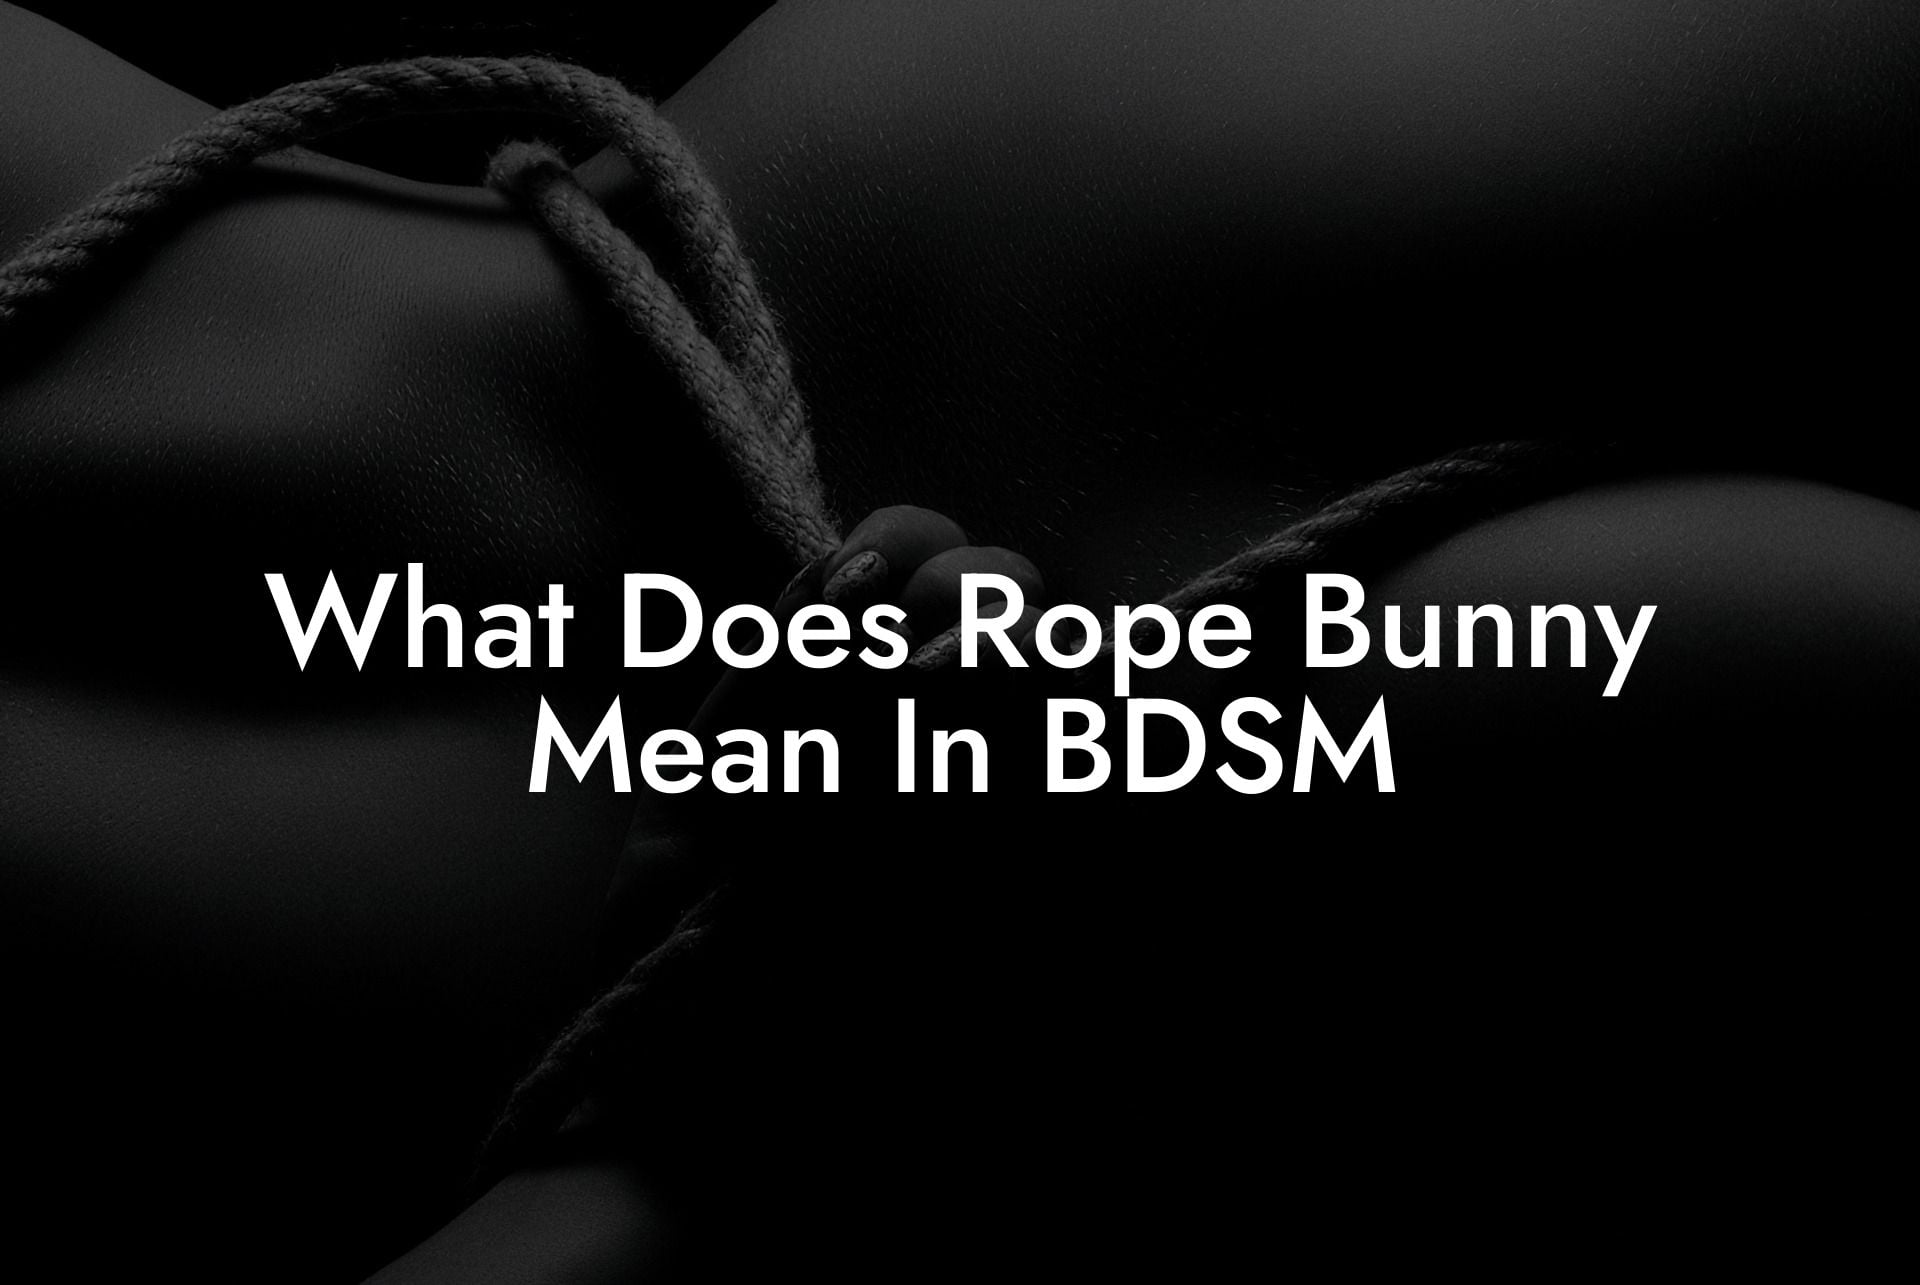 What Does Rope Bunny Mean In BDSM